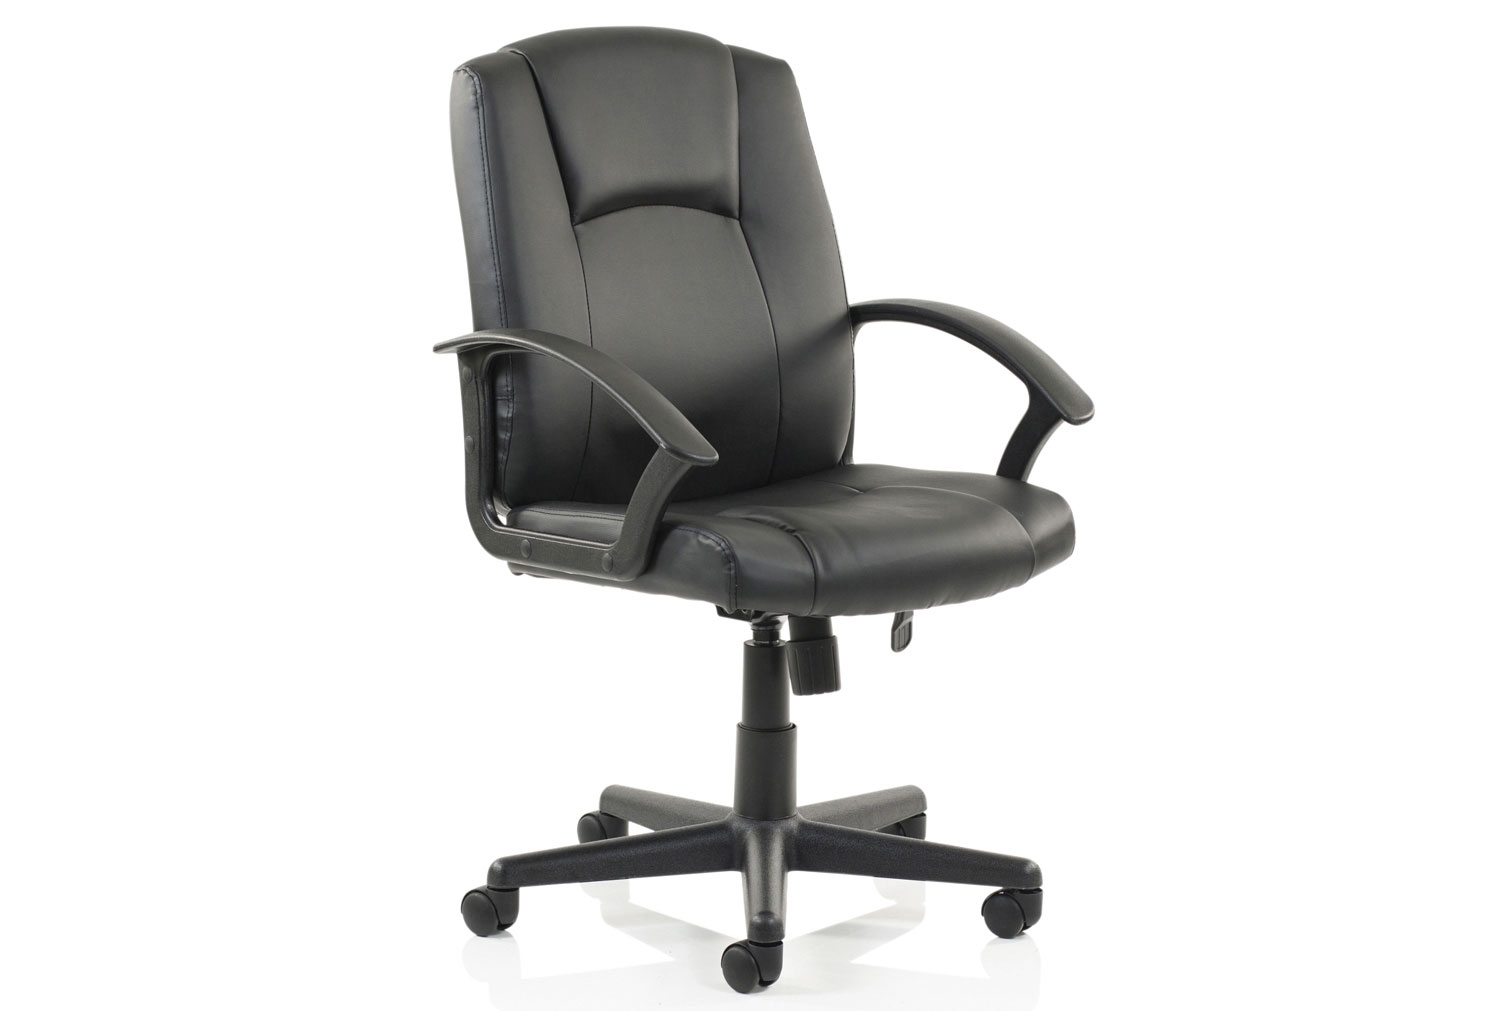 Alcantara Executive Leather Office Chair, Fully Installed